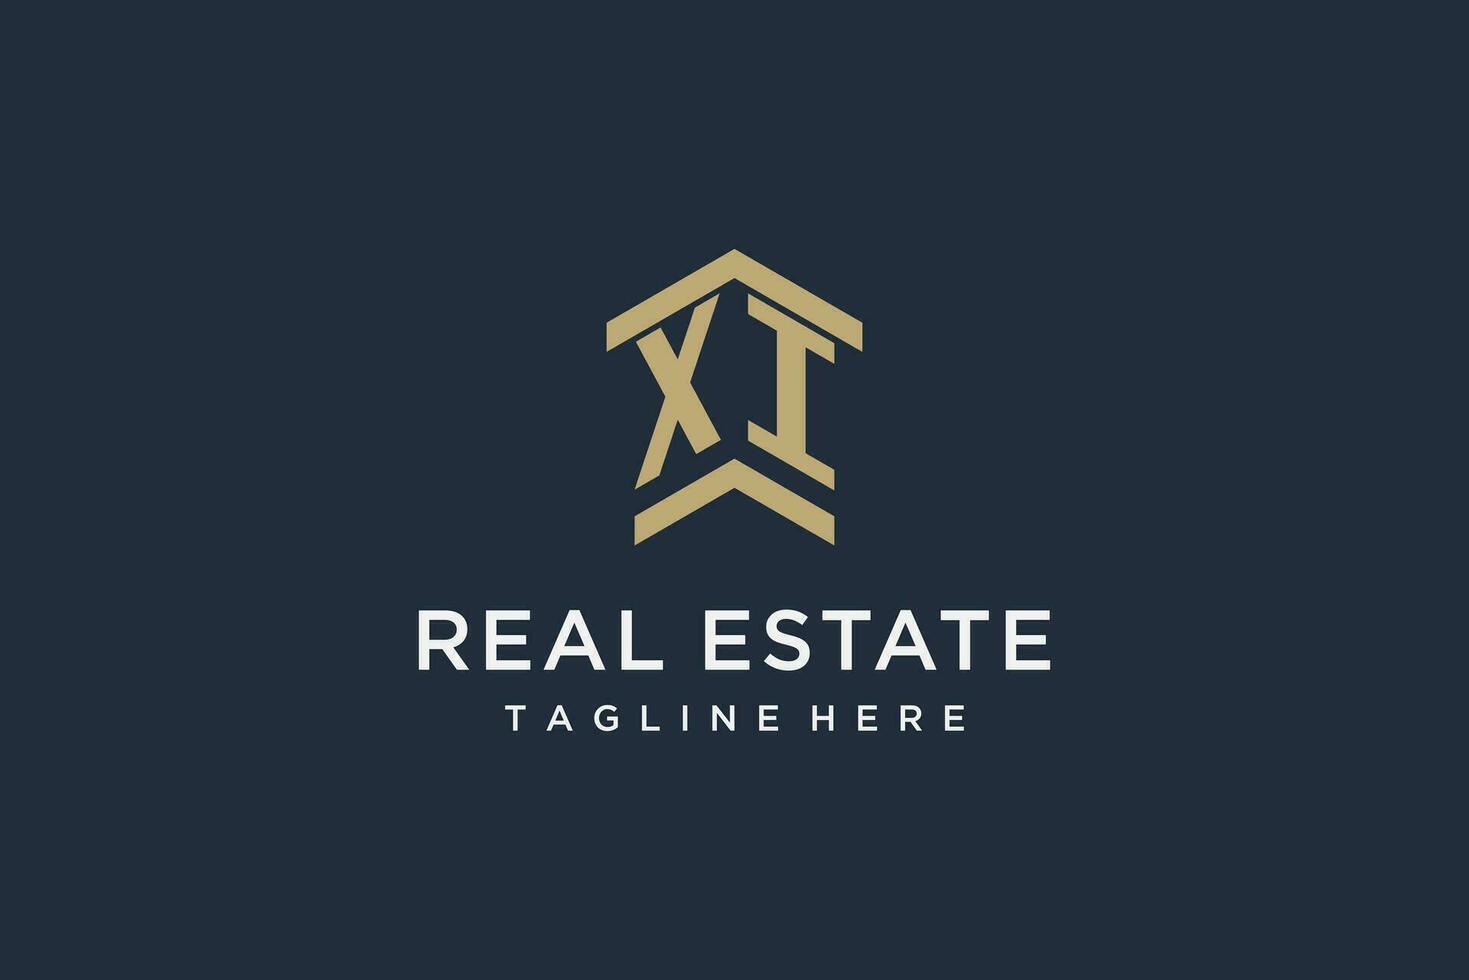 Initial XI logo for real estate with simple and creative house roof icon logo design ideas vector